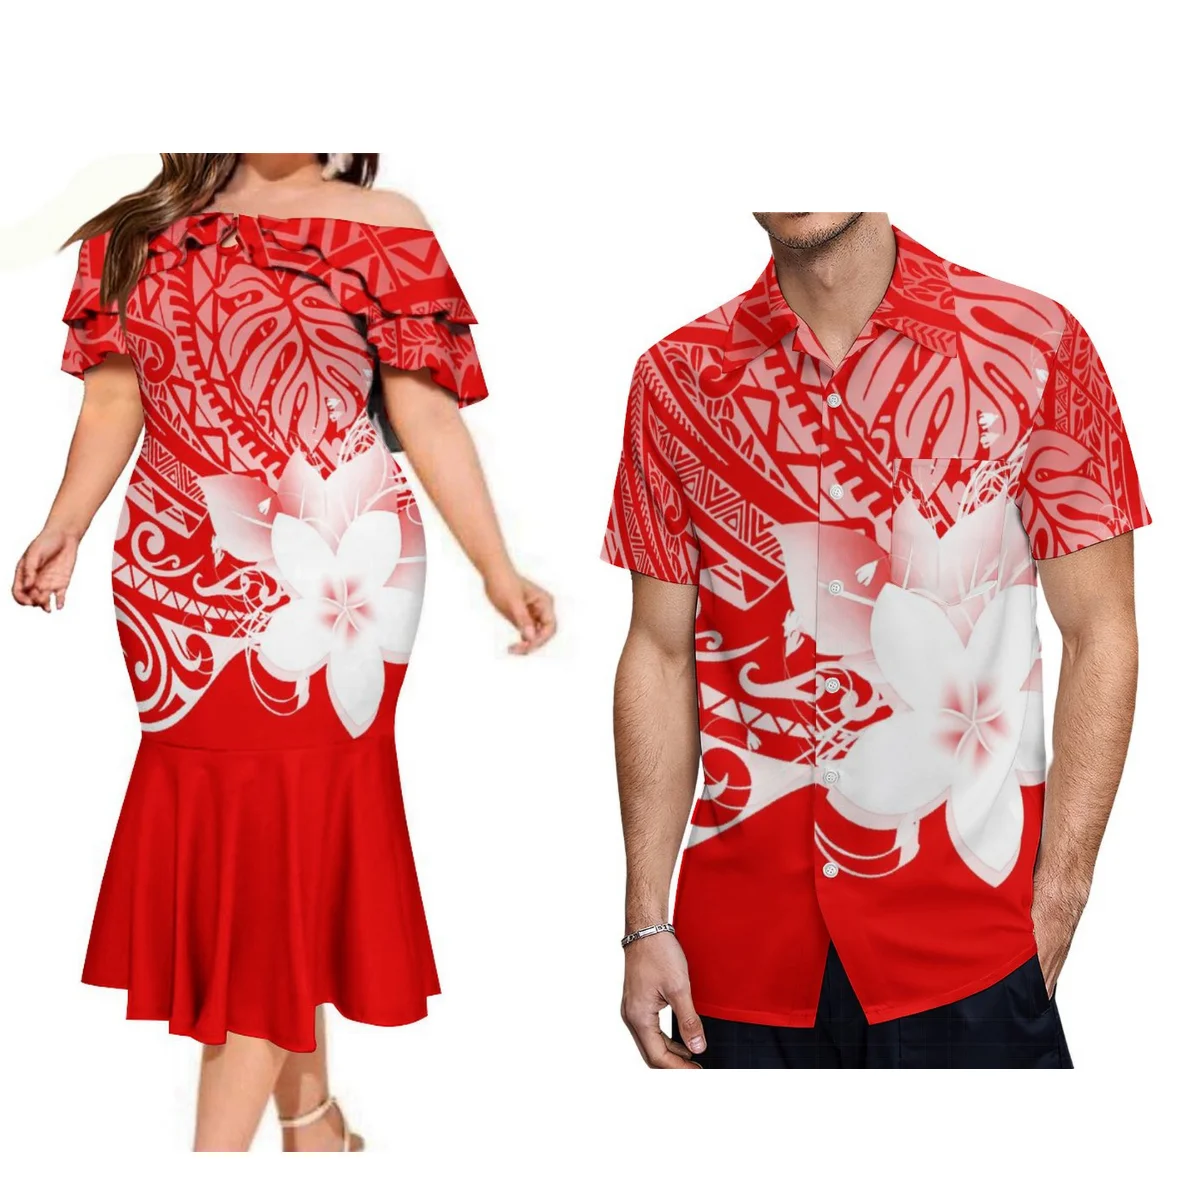 

Polynesian Islands Samoa Red Floral Couple Suit Women'S Off-The-Shoulder Dress For Dinner Evening Gown With Hawaiian Men'S Shirt